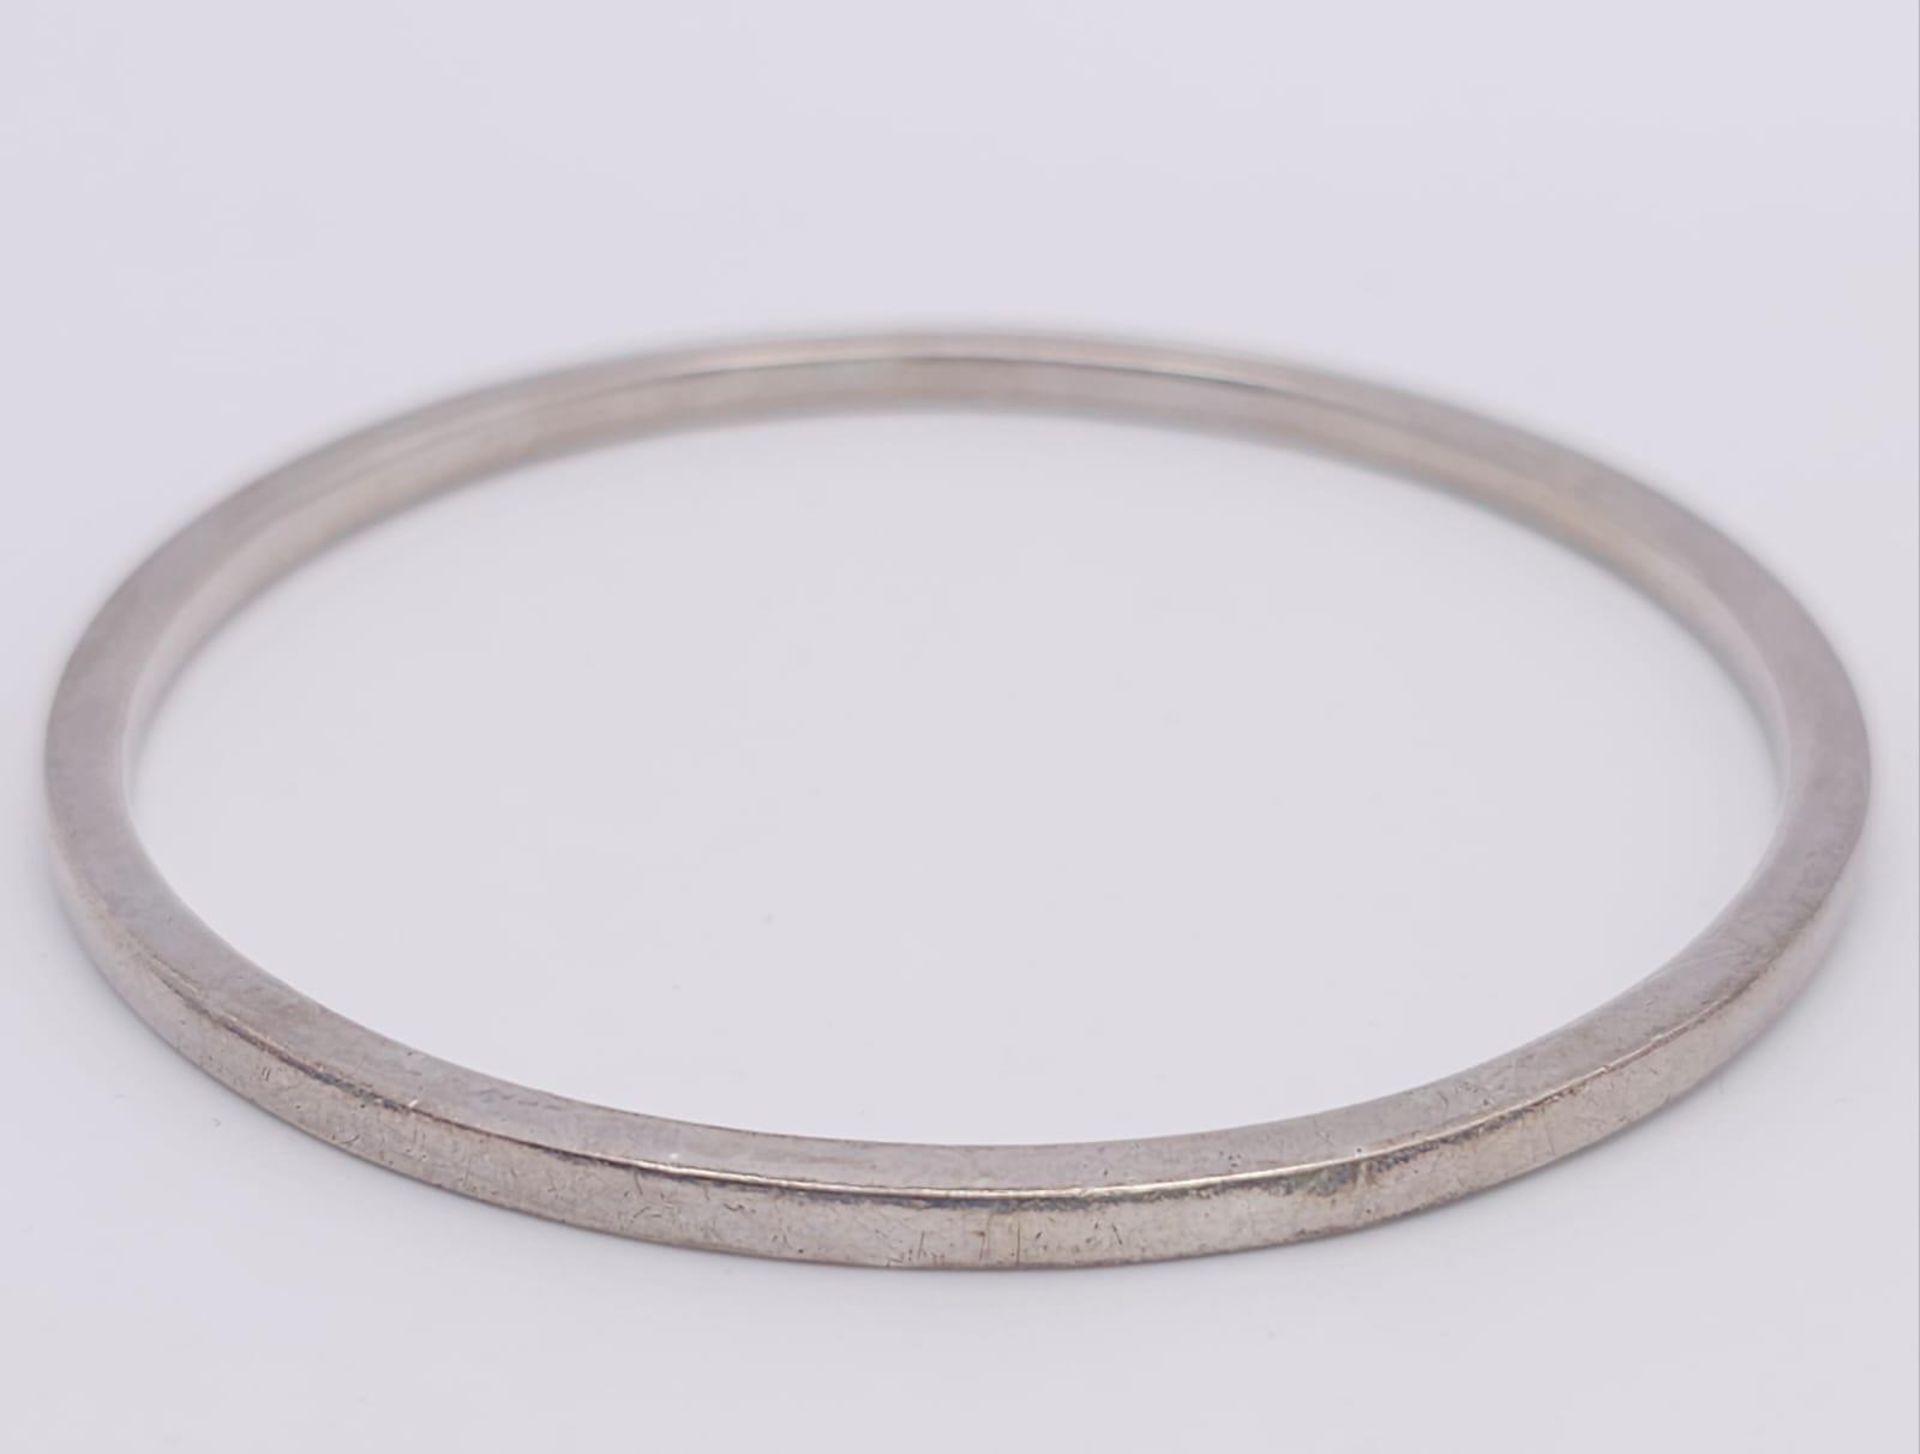 A vintage sterling silver bangle with full London hallmarks, 1978. Total weight 20.7G. Diameter 7cm. - Image 5 of 5